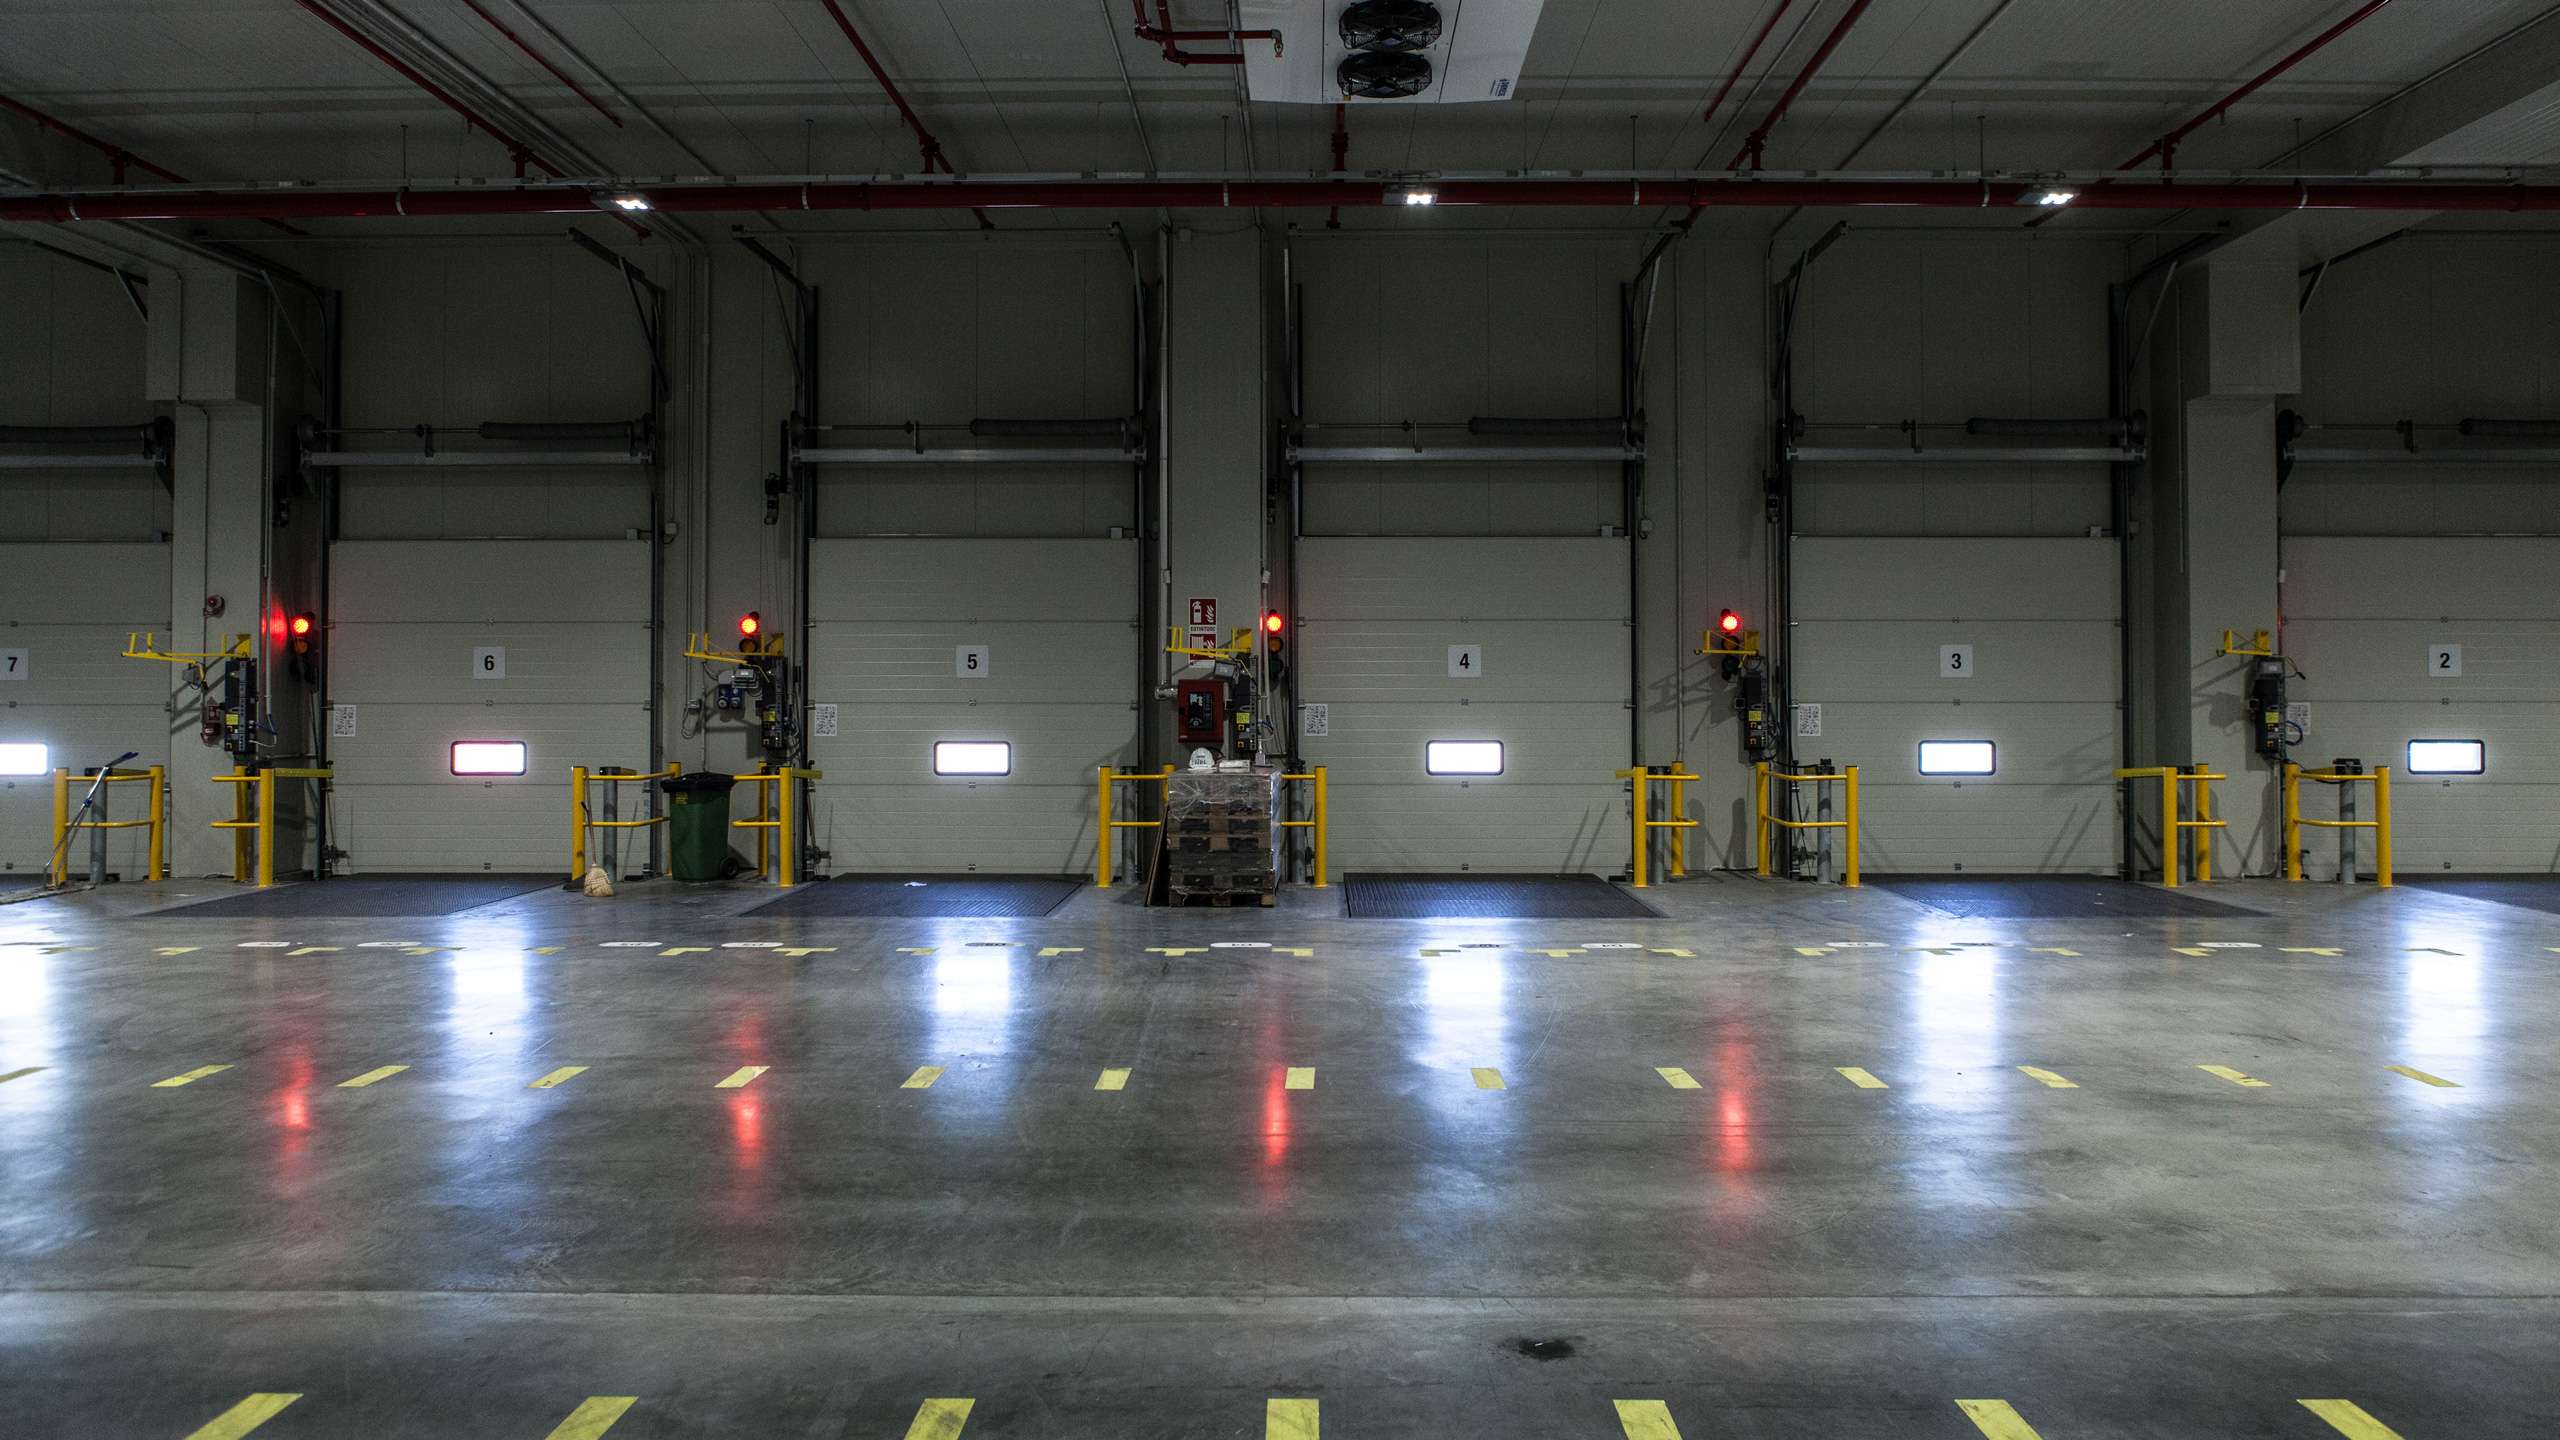 In a gloomy warehouse, the loading ramps can be seen from inside. Red spotlights and a little light from outside illuminate the room.